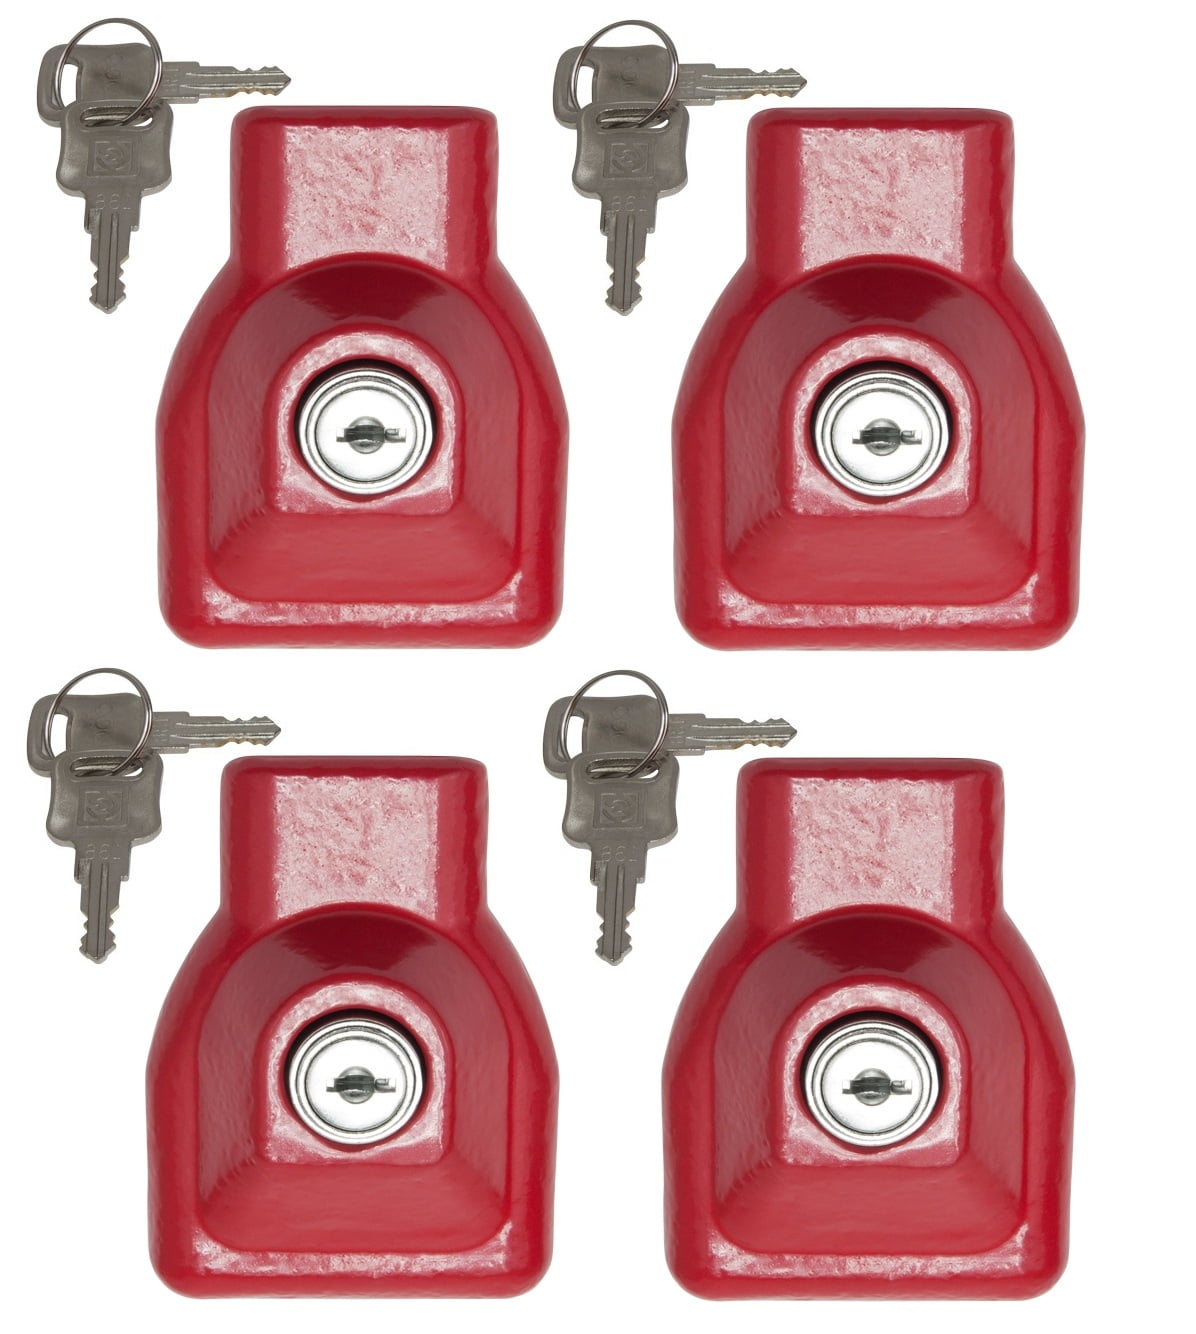 Mytee Products 4 Pack Heavy Duty Aluminum Air Brake Glad Hand Lock for Tractor Trailer